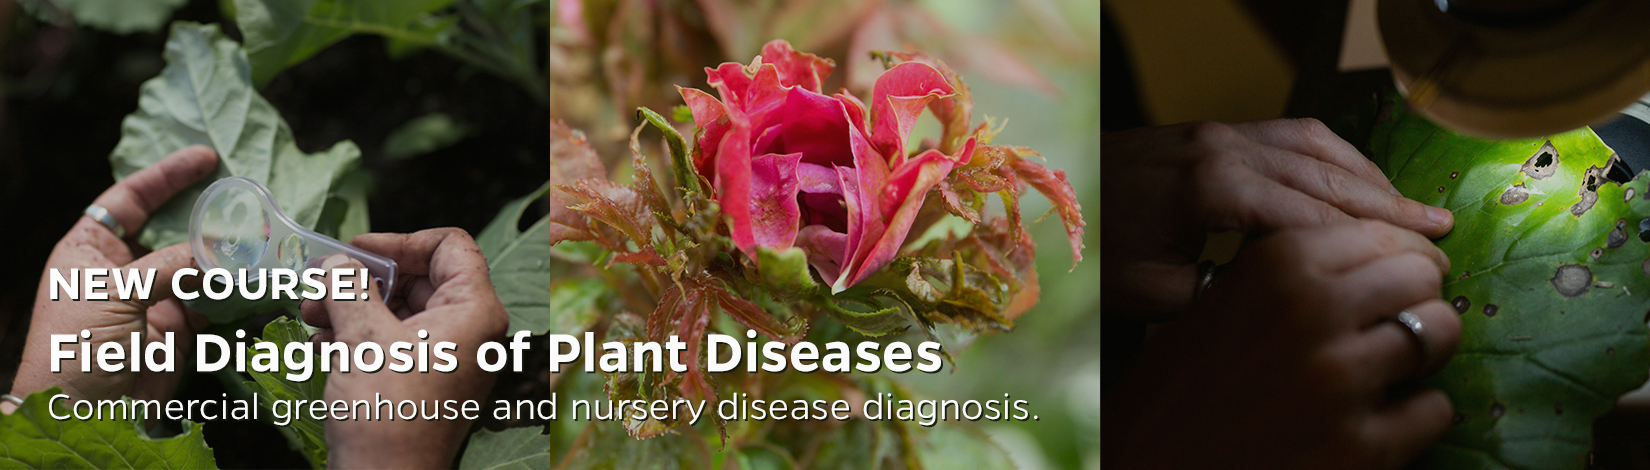 NEW COURSE! Field Diagnosis of Plant Diseases, Commercial greenhouse and nursery disease diagnosis.